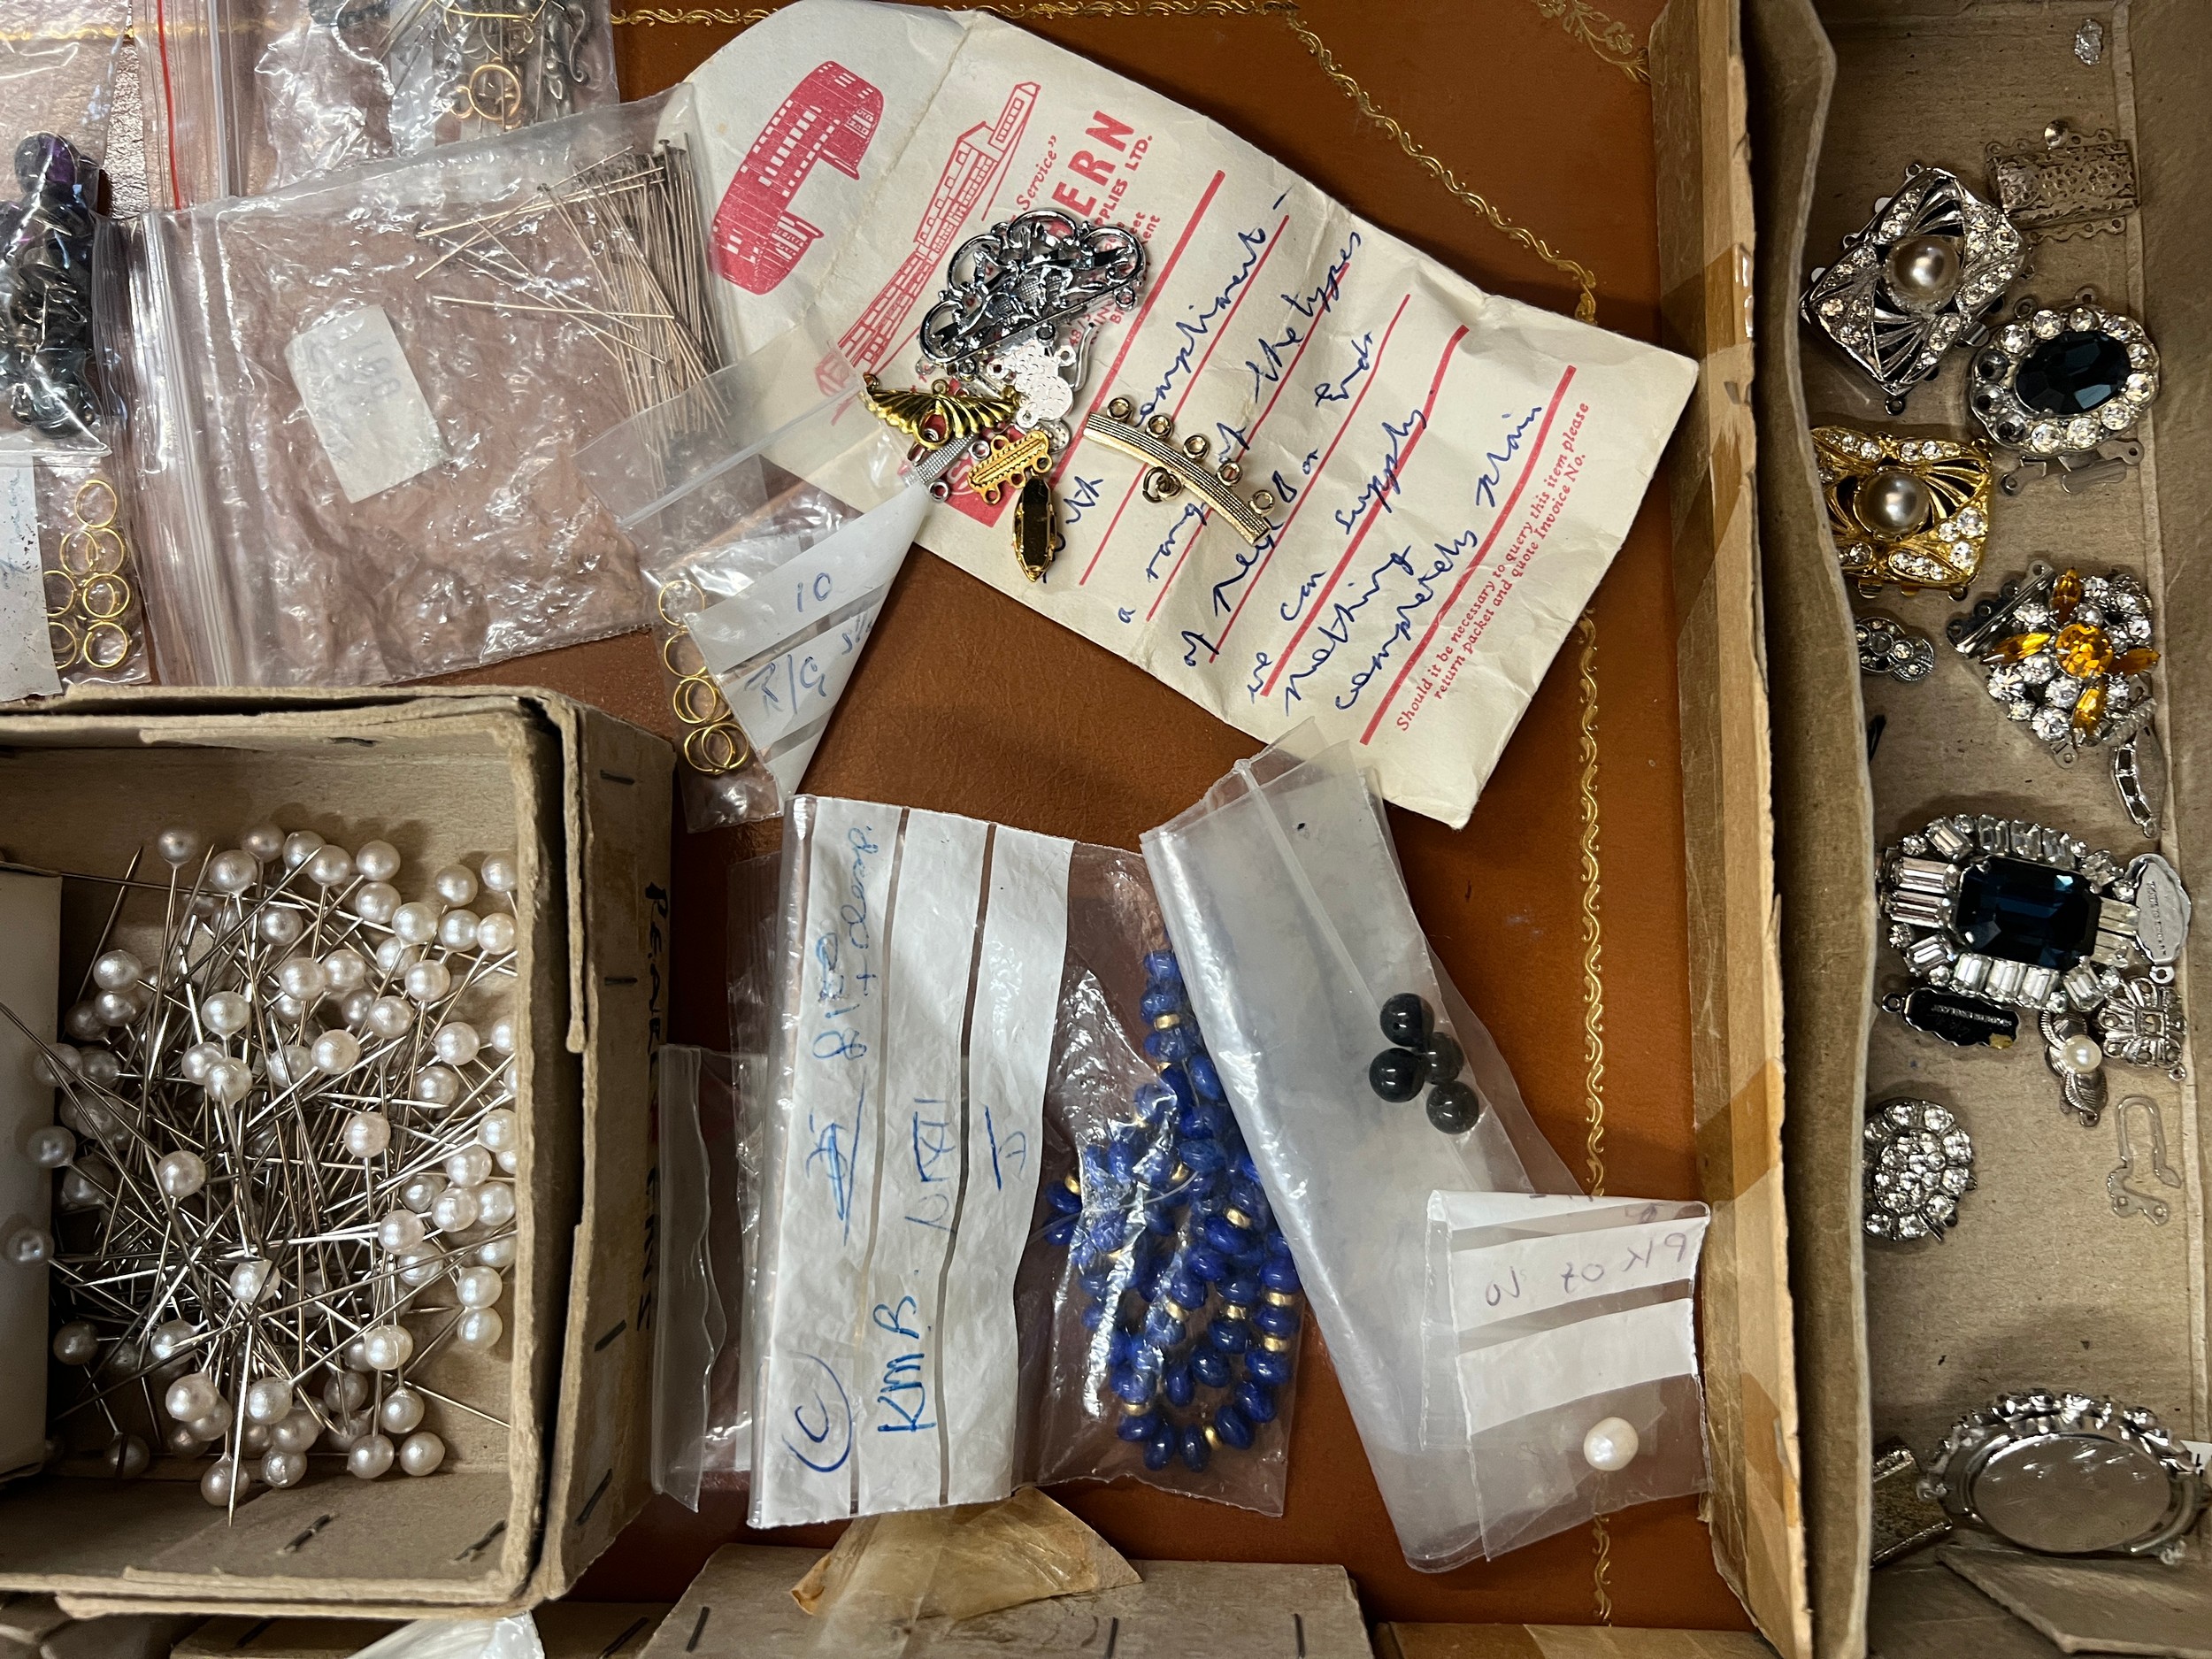 A quantity of jewellery fastenings, loose beads including lapis etc. - Image 4 of 5